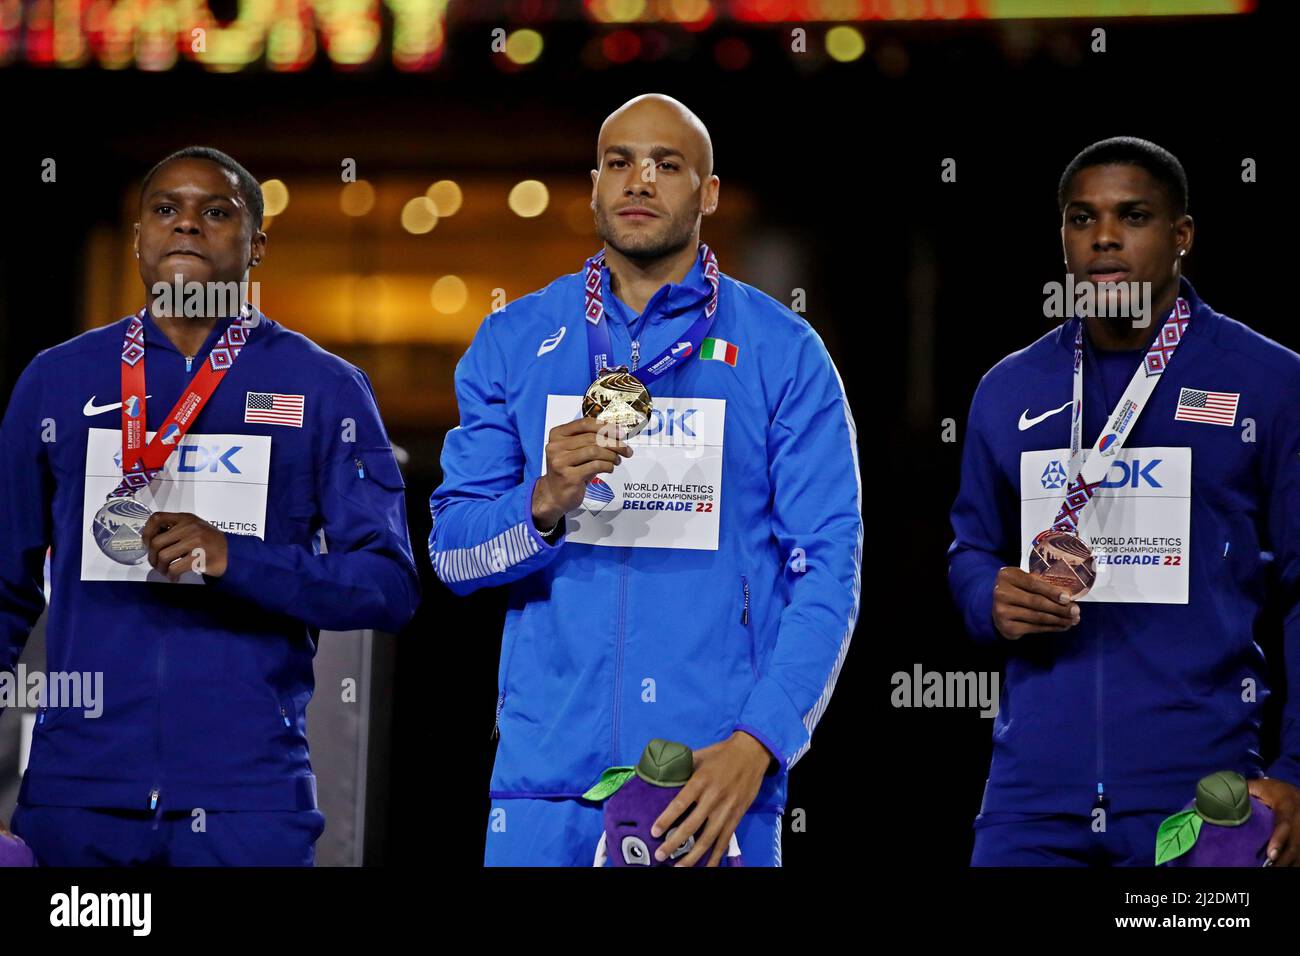 Men's 60m gold medalist Lamont Marcell Jacobs (GRE), center, poses with silver medalist Christian Coleman (USA), left, and bronze medalist Marvin Brac Stock Photo